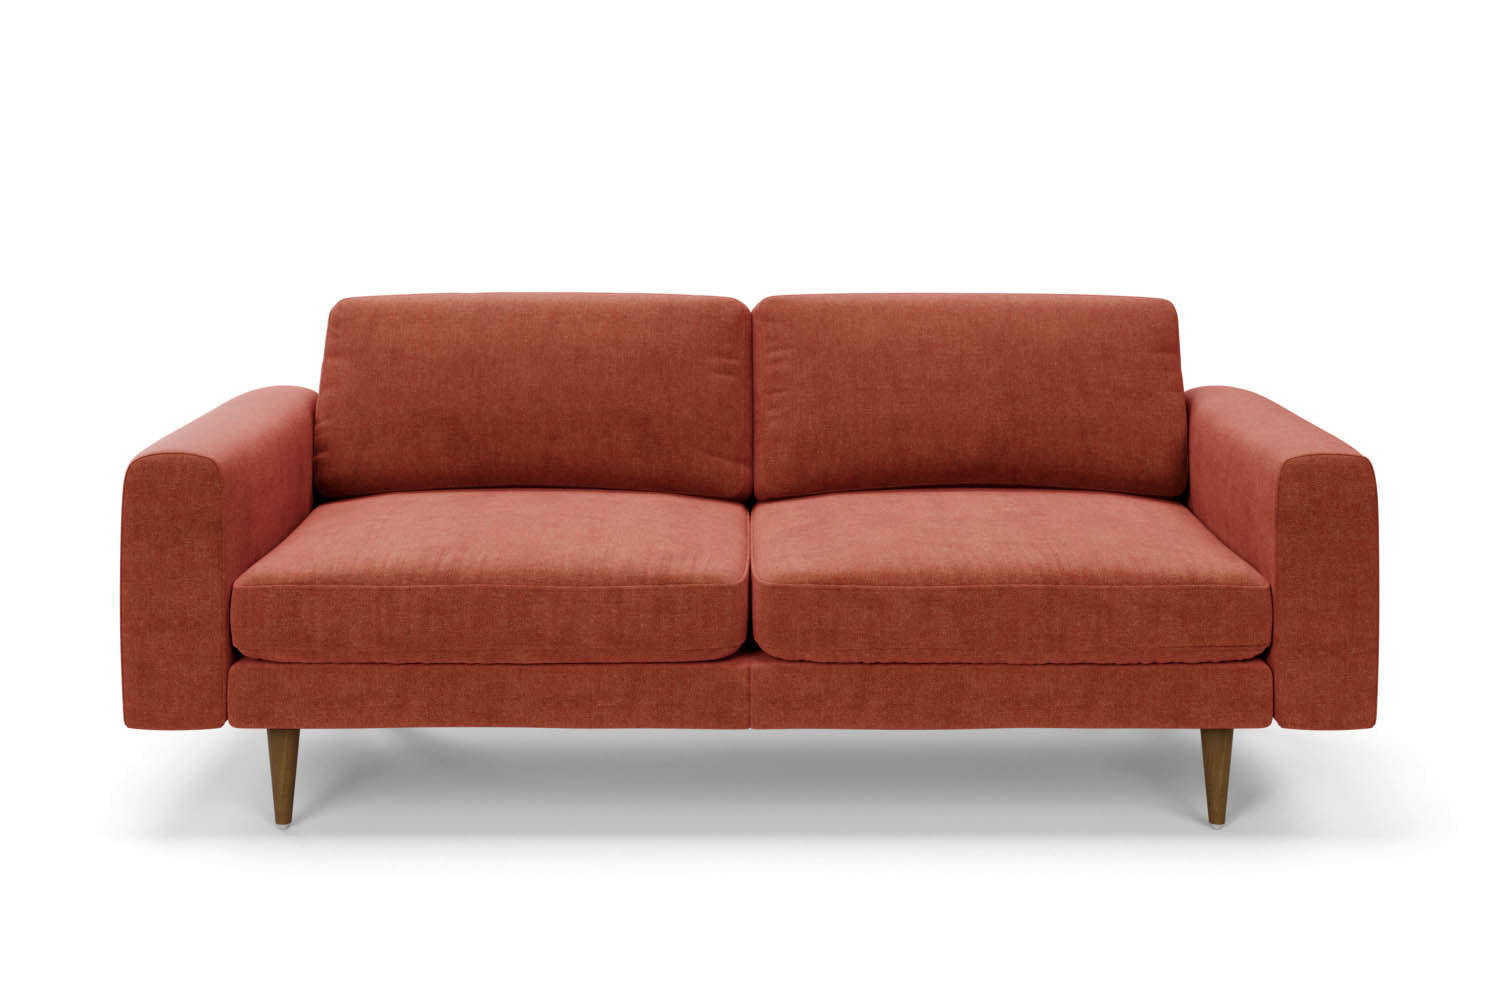 The Big Chill 3 Seater Sofa in Spice Chenille with brown legs front variant_40886267346992